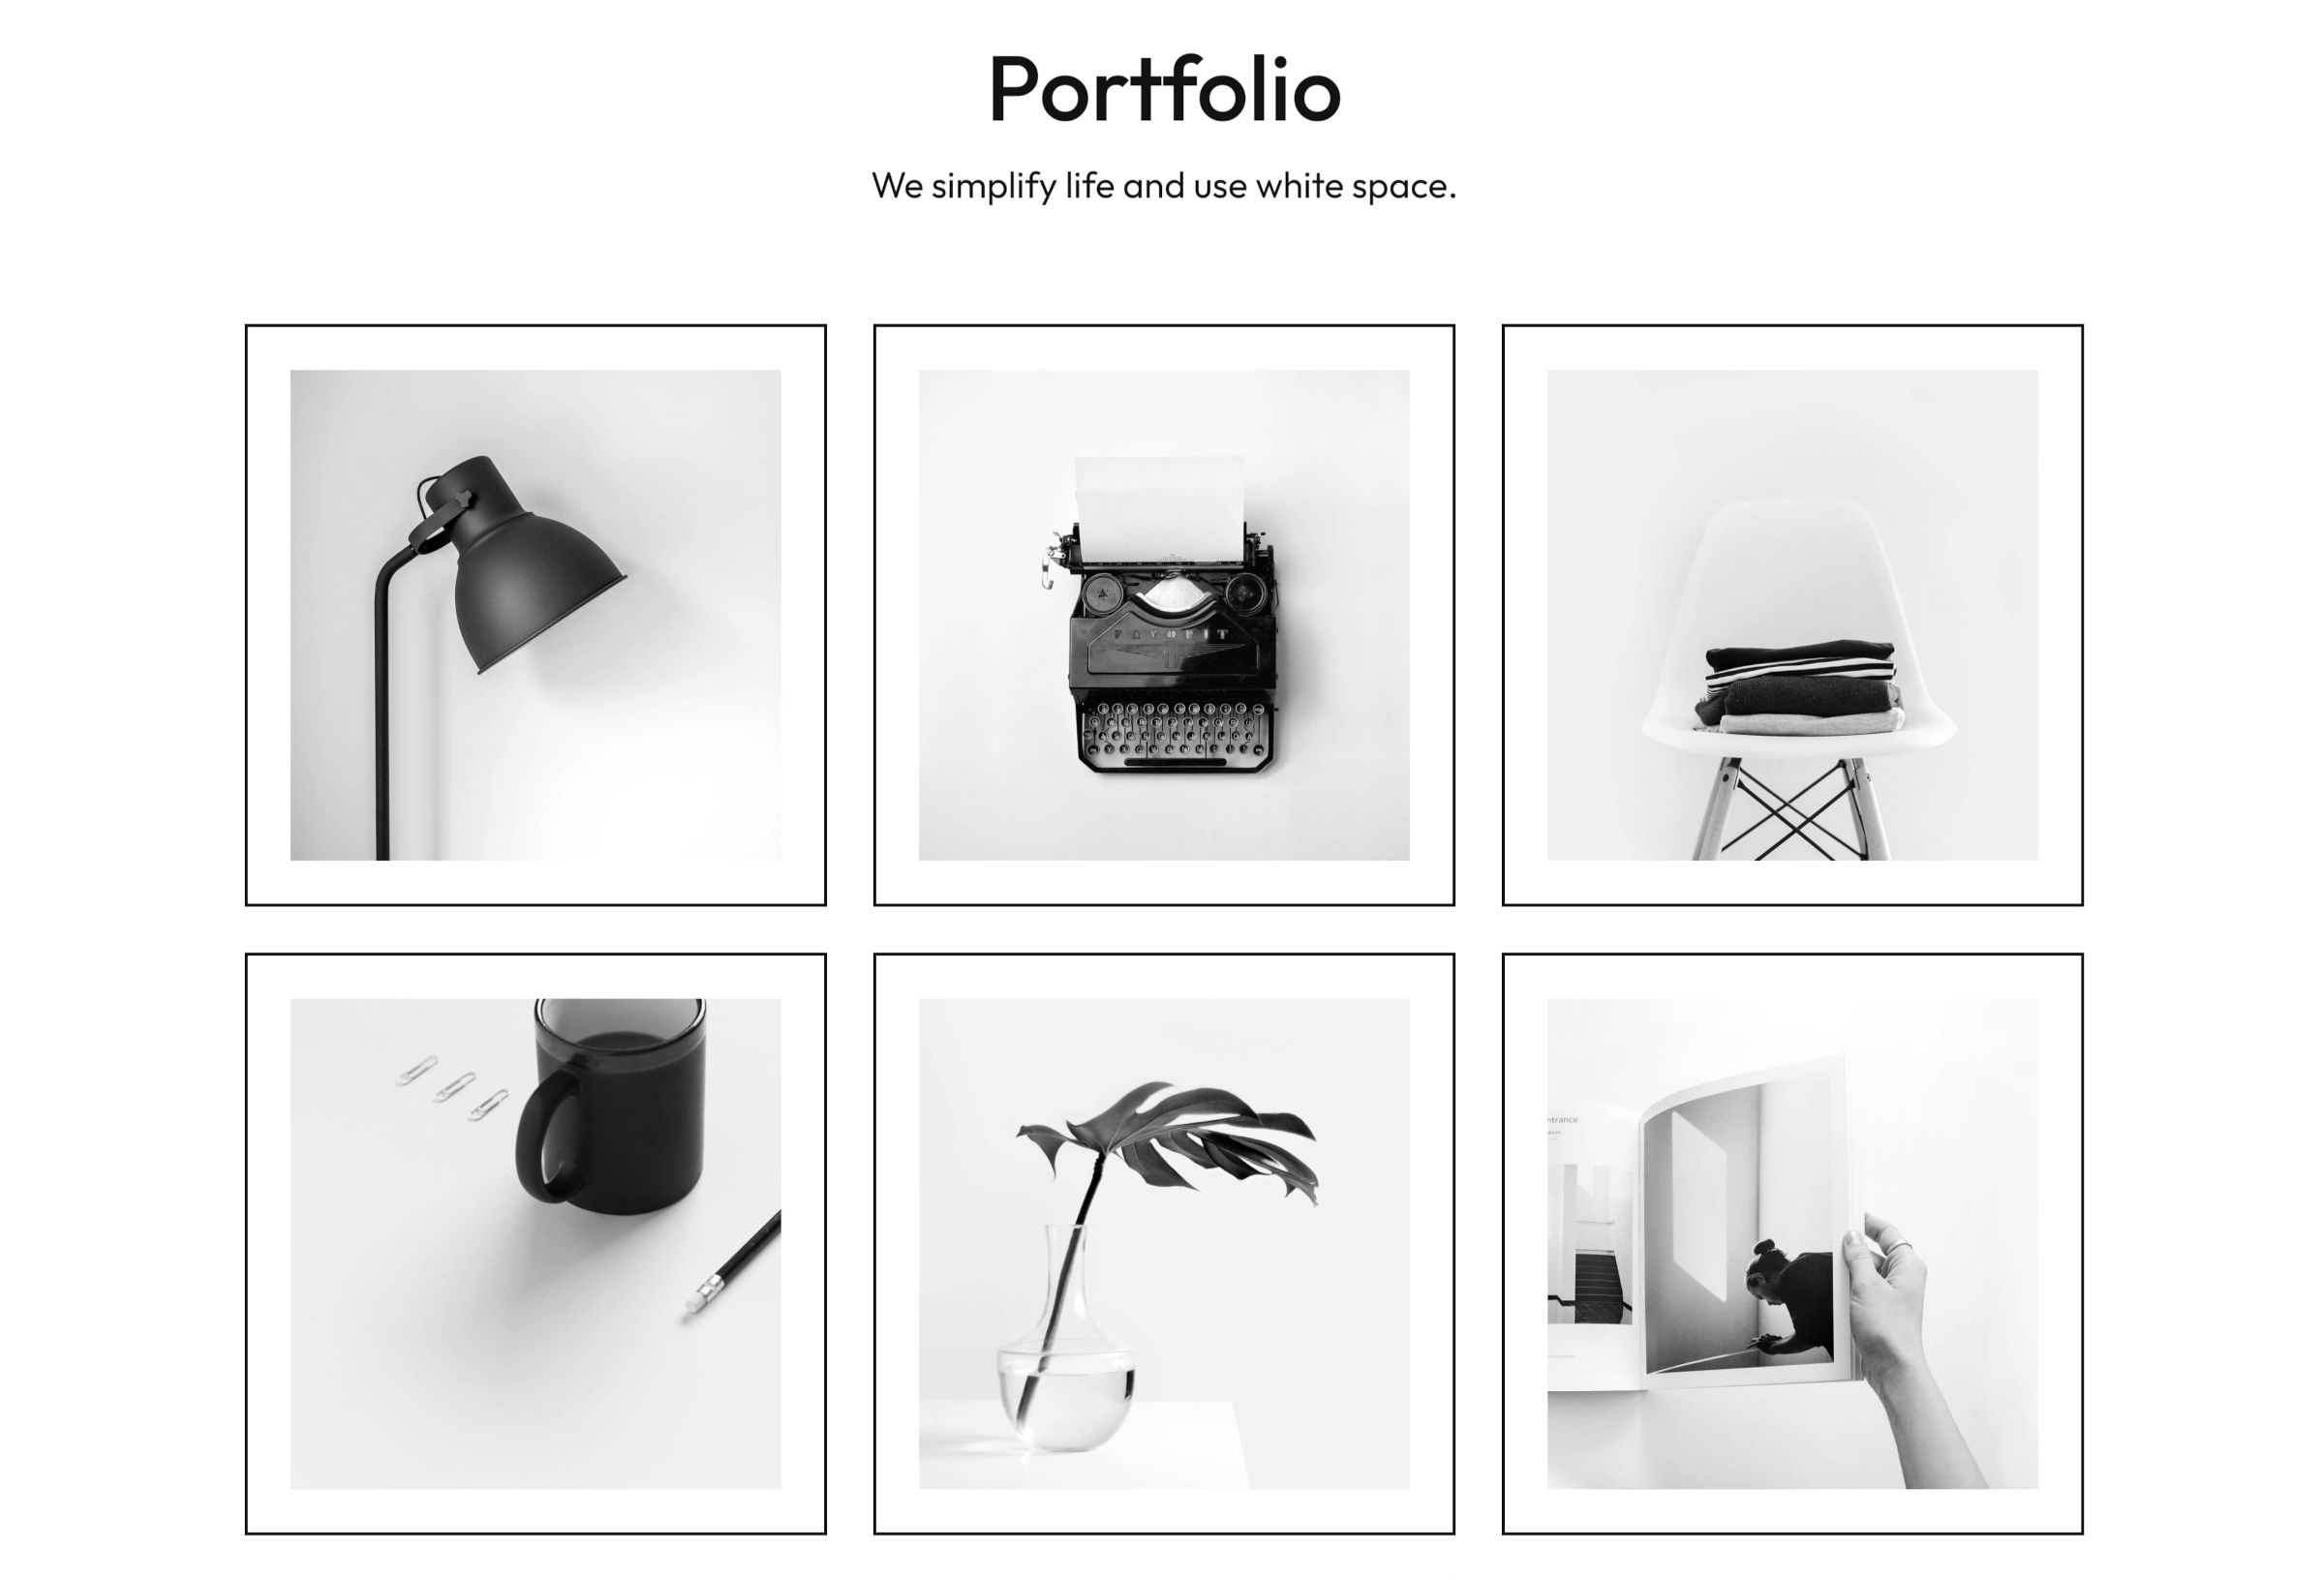 Three-by-three grid of square images in a portfolio-style layout.